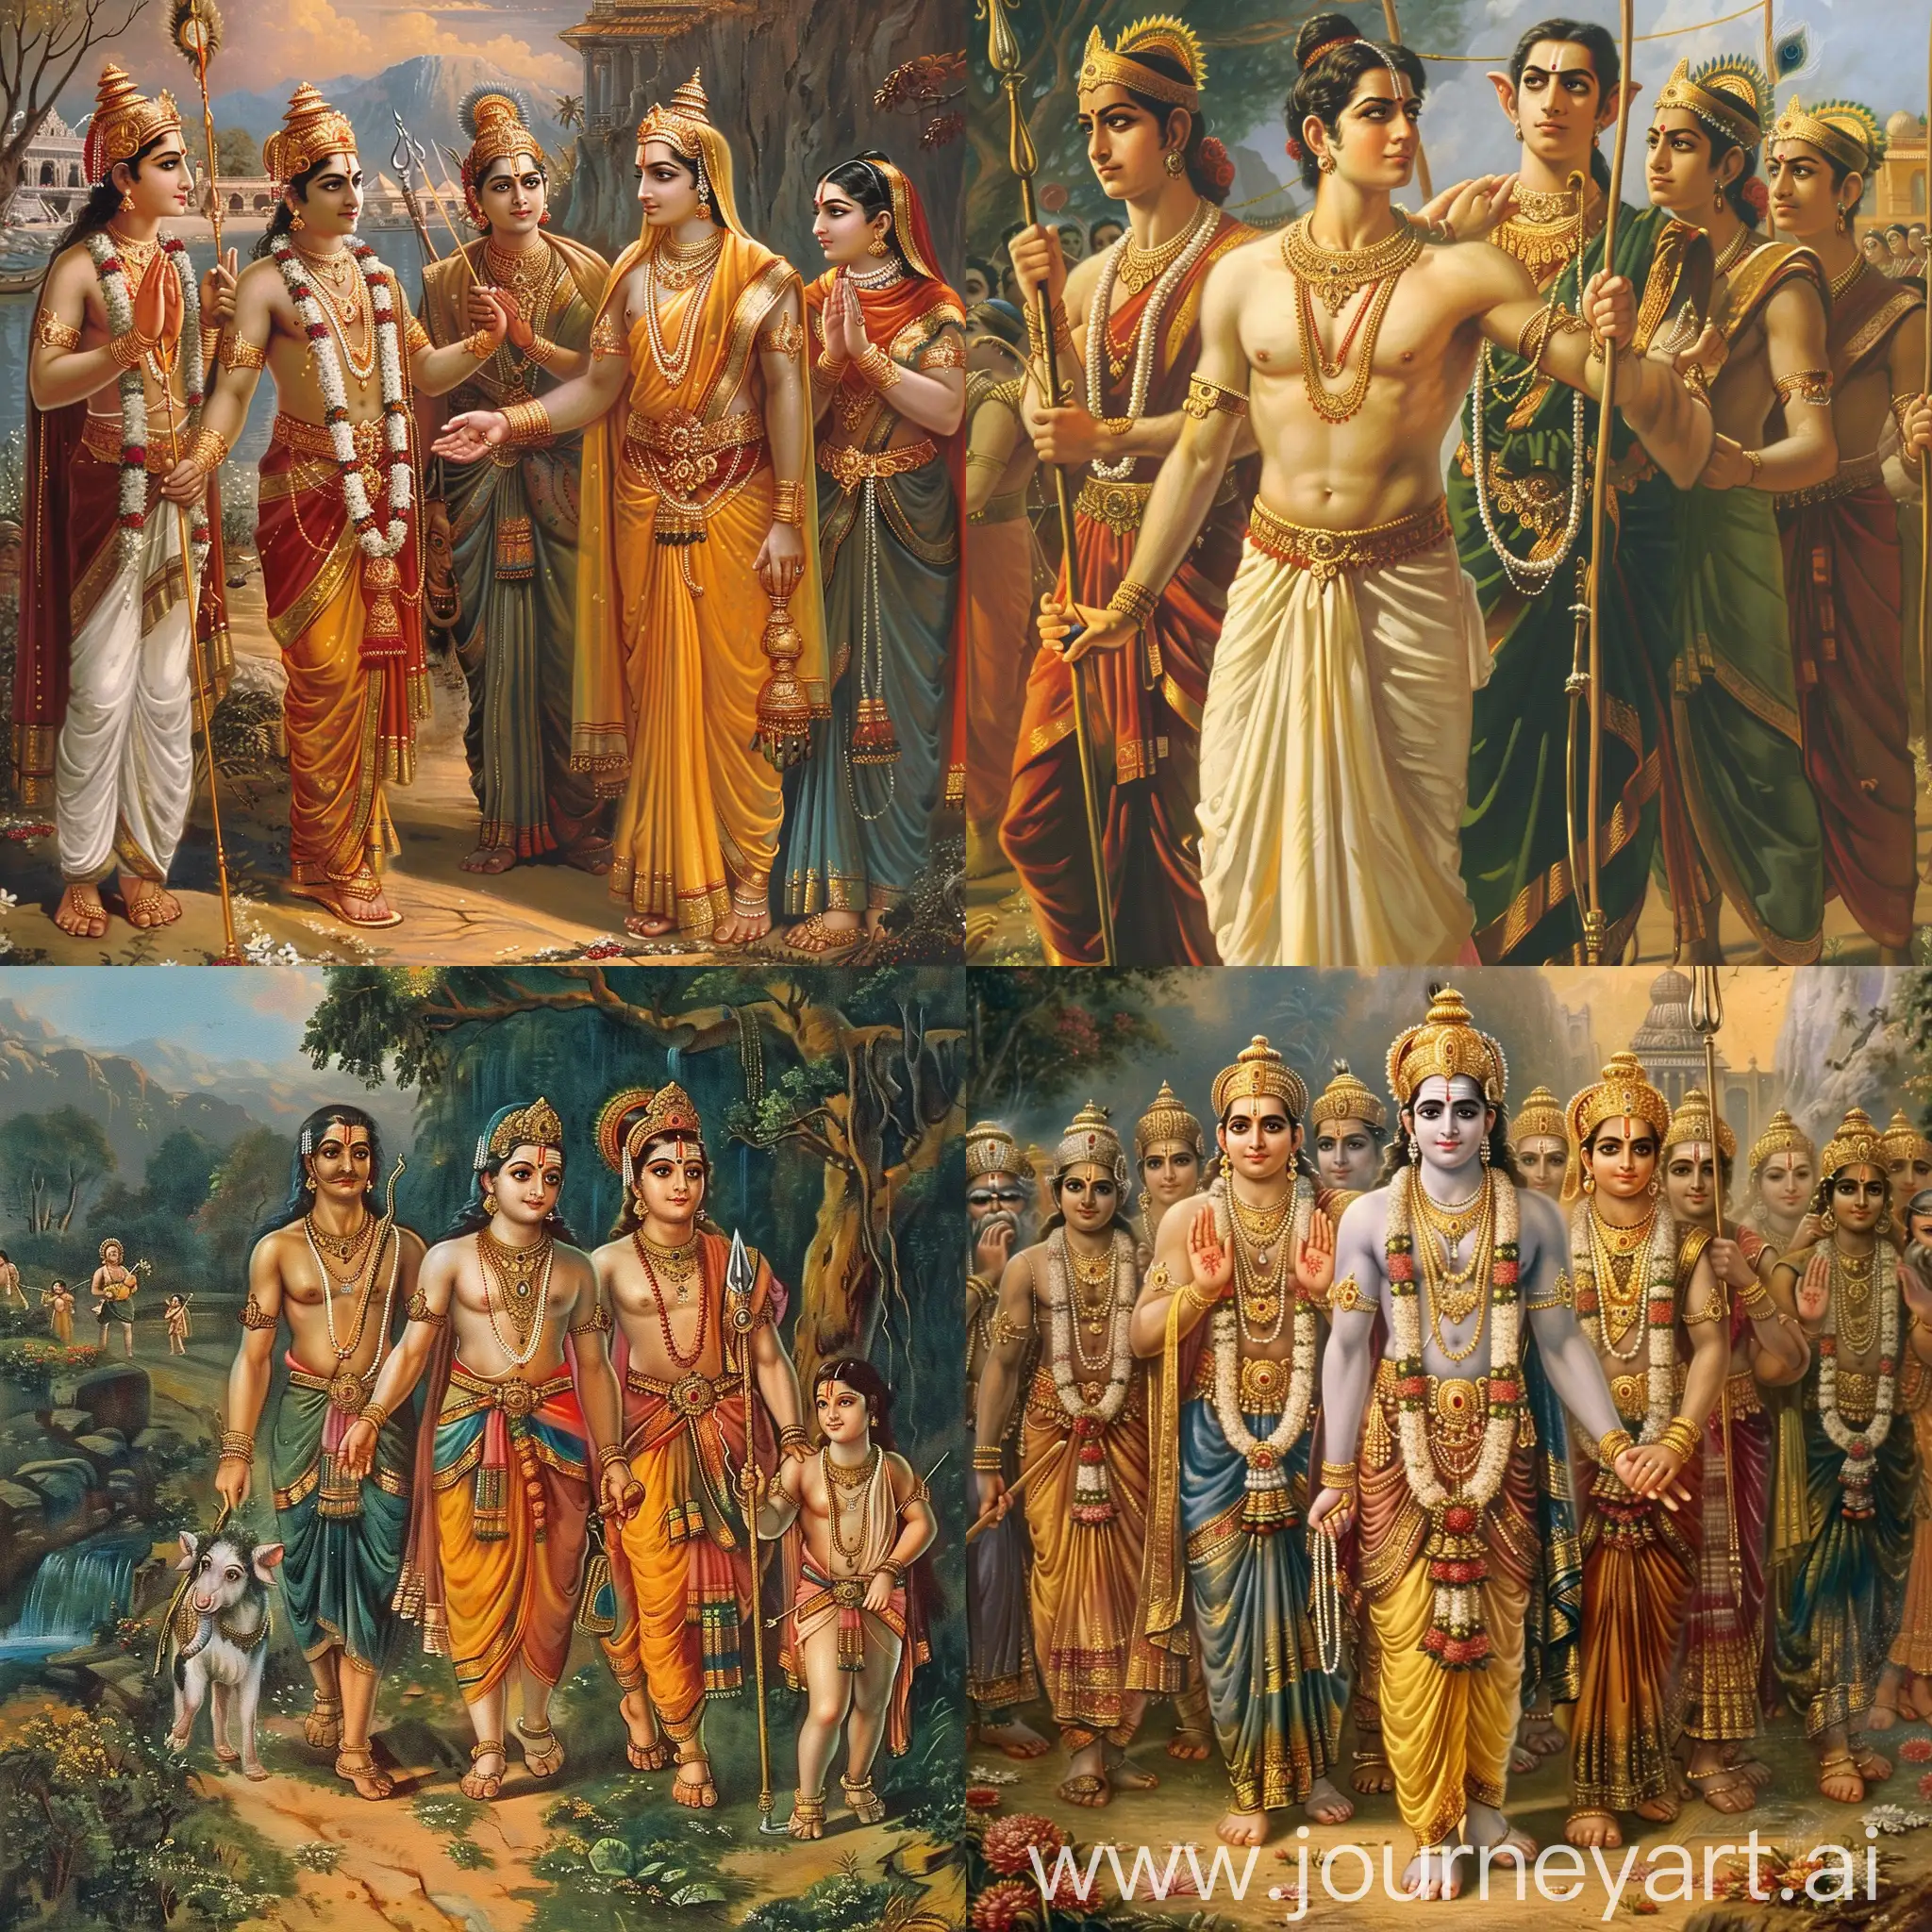 Illustration-of-the-5-Stages-of-Ramayana-Epic-Journey